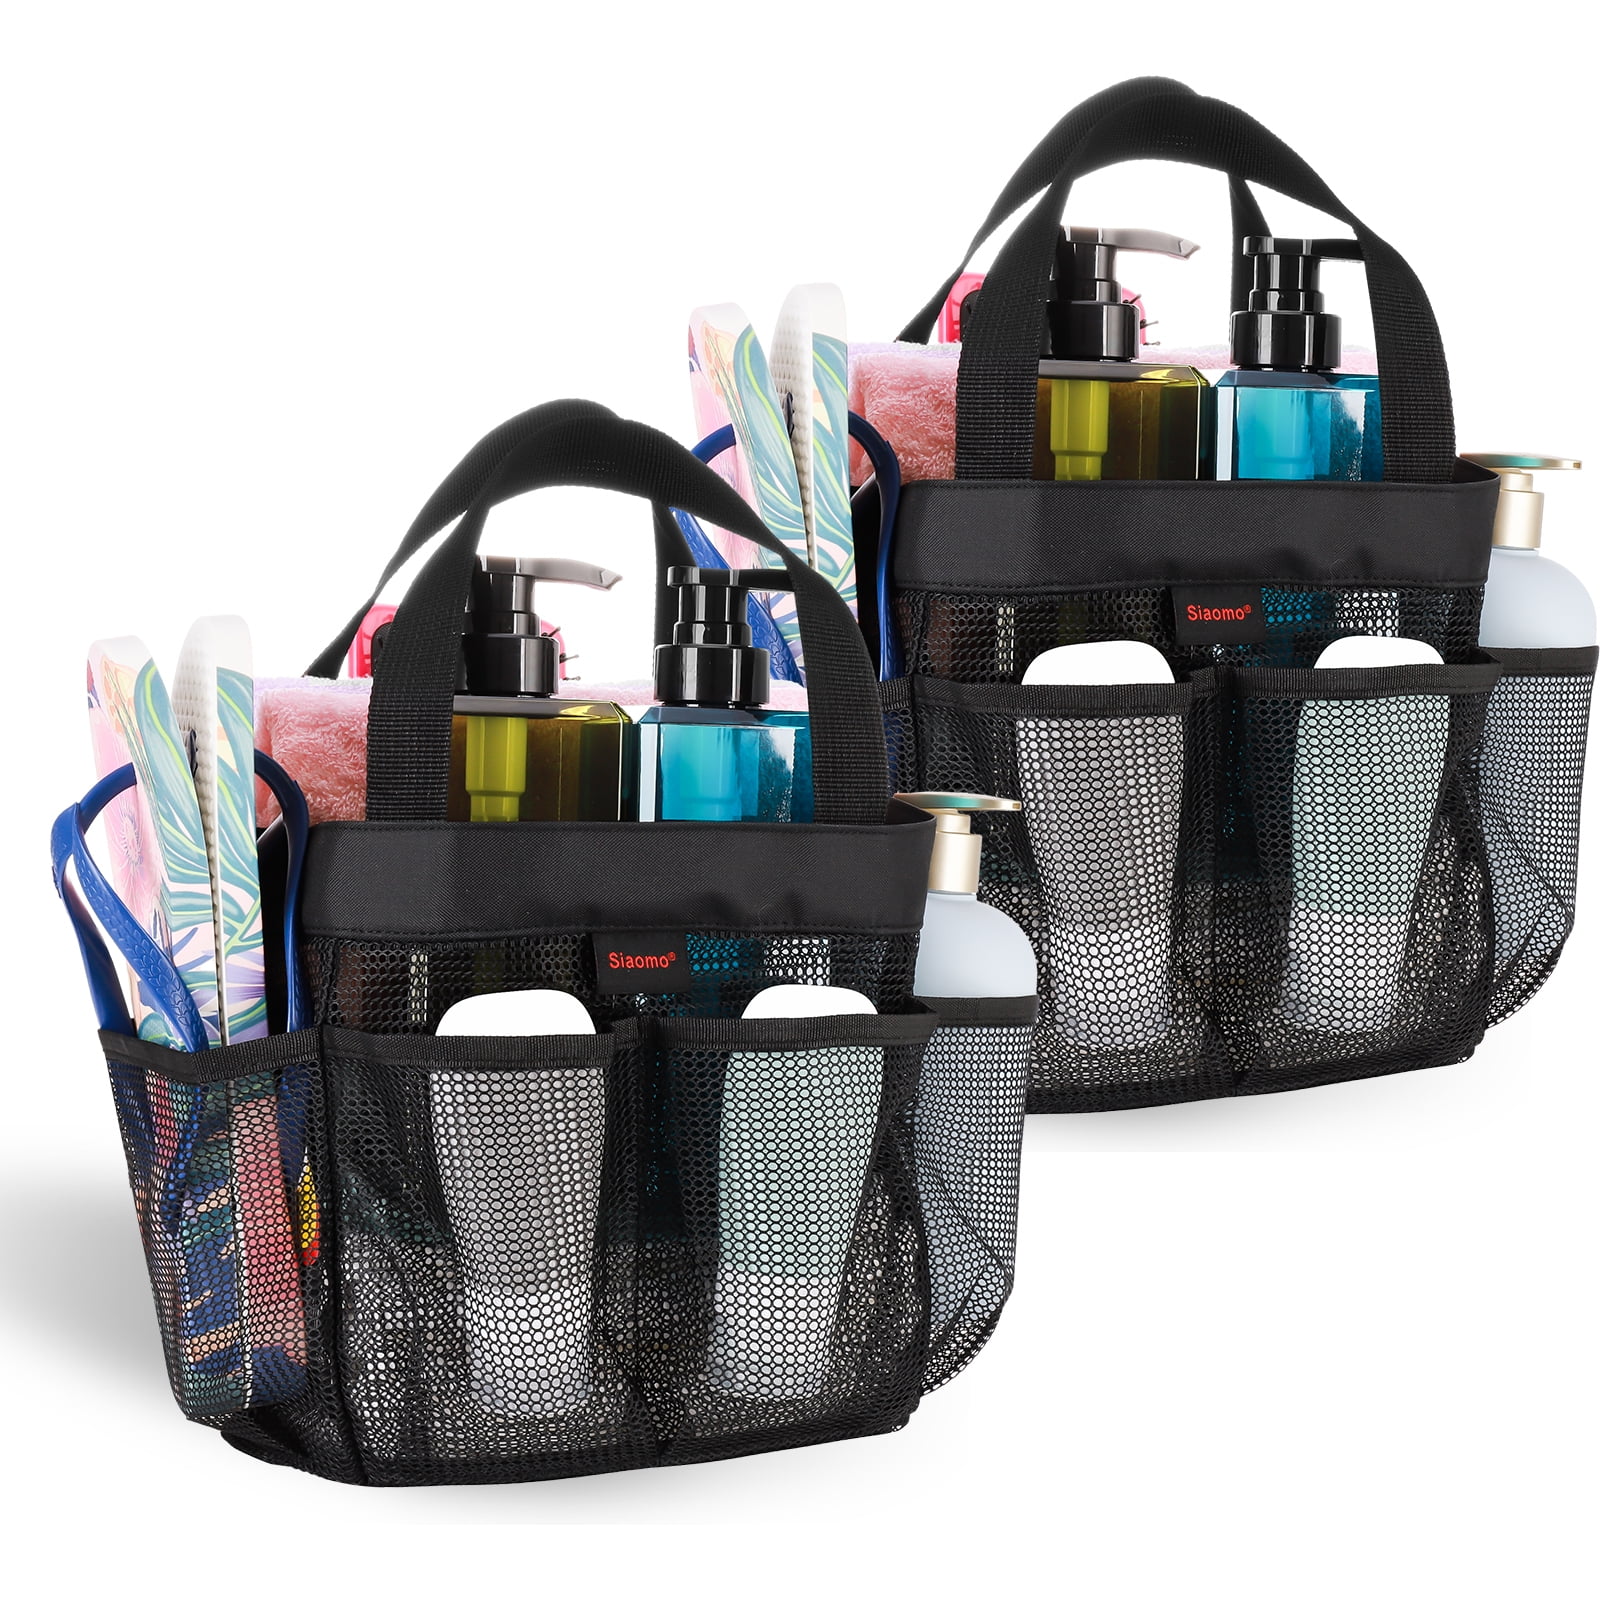  Jovilife Hanging Mesh Shower Caddy tote portable